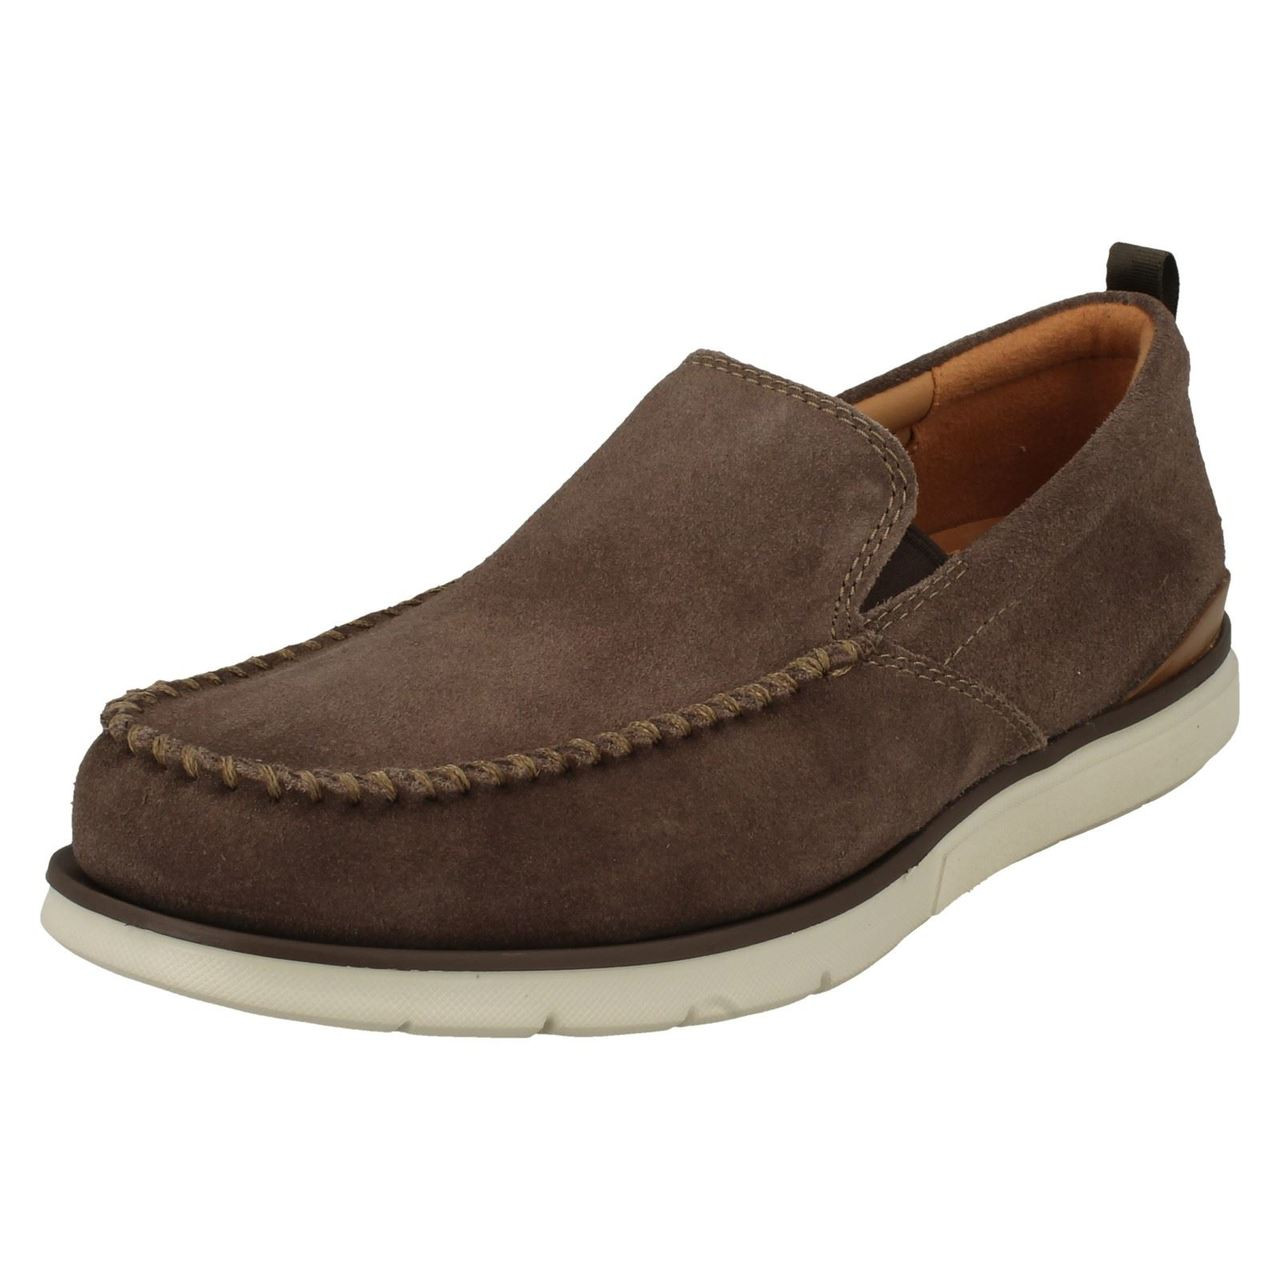 clarks men's slip on casual shoes